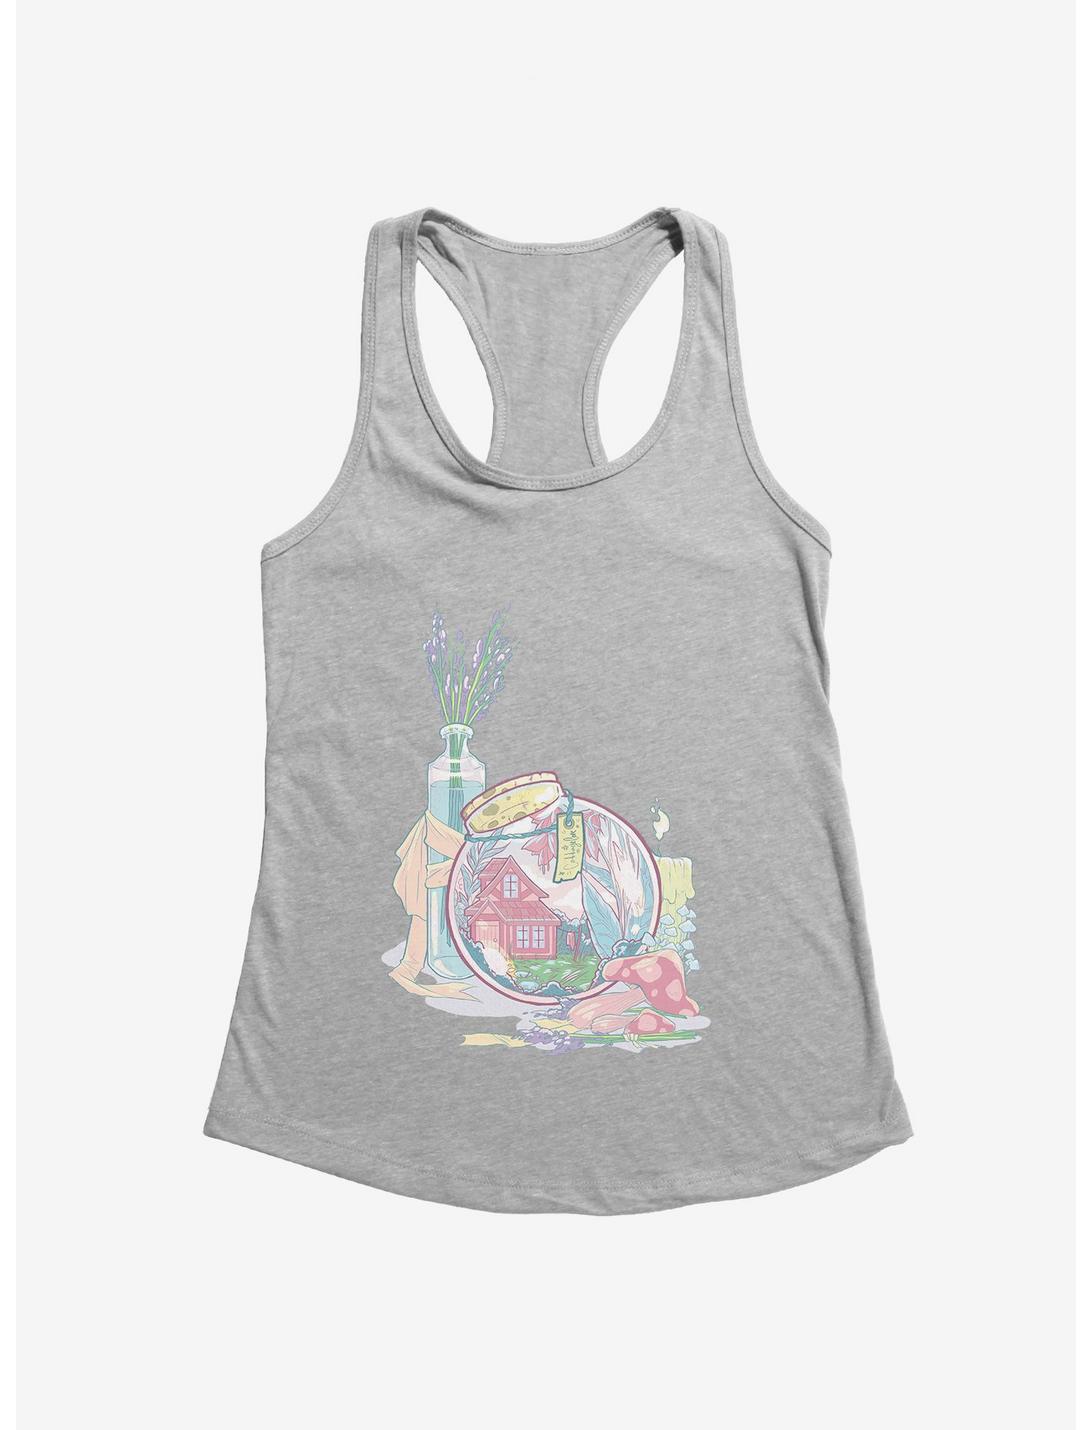 CottageCore Hannah Barr Keep in a Bottle Girls Tank, , hi-res